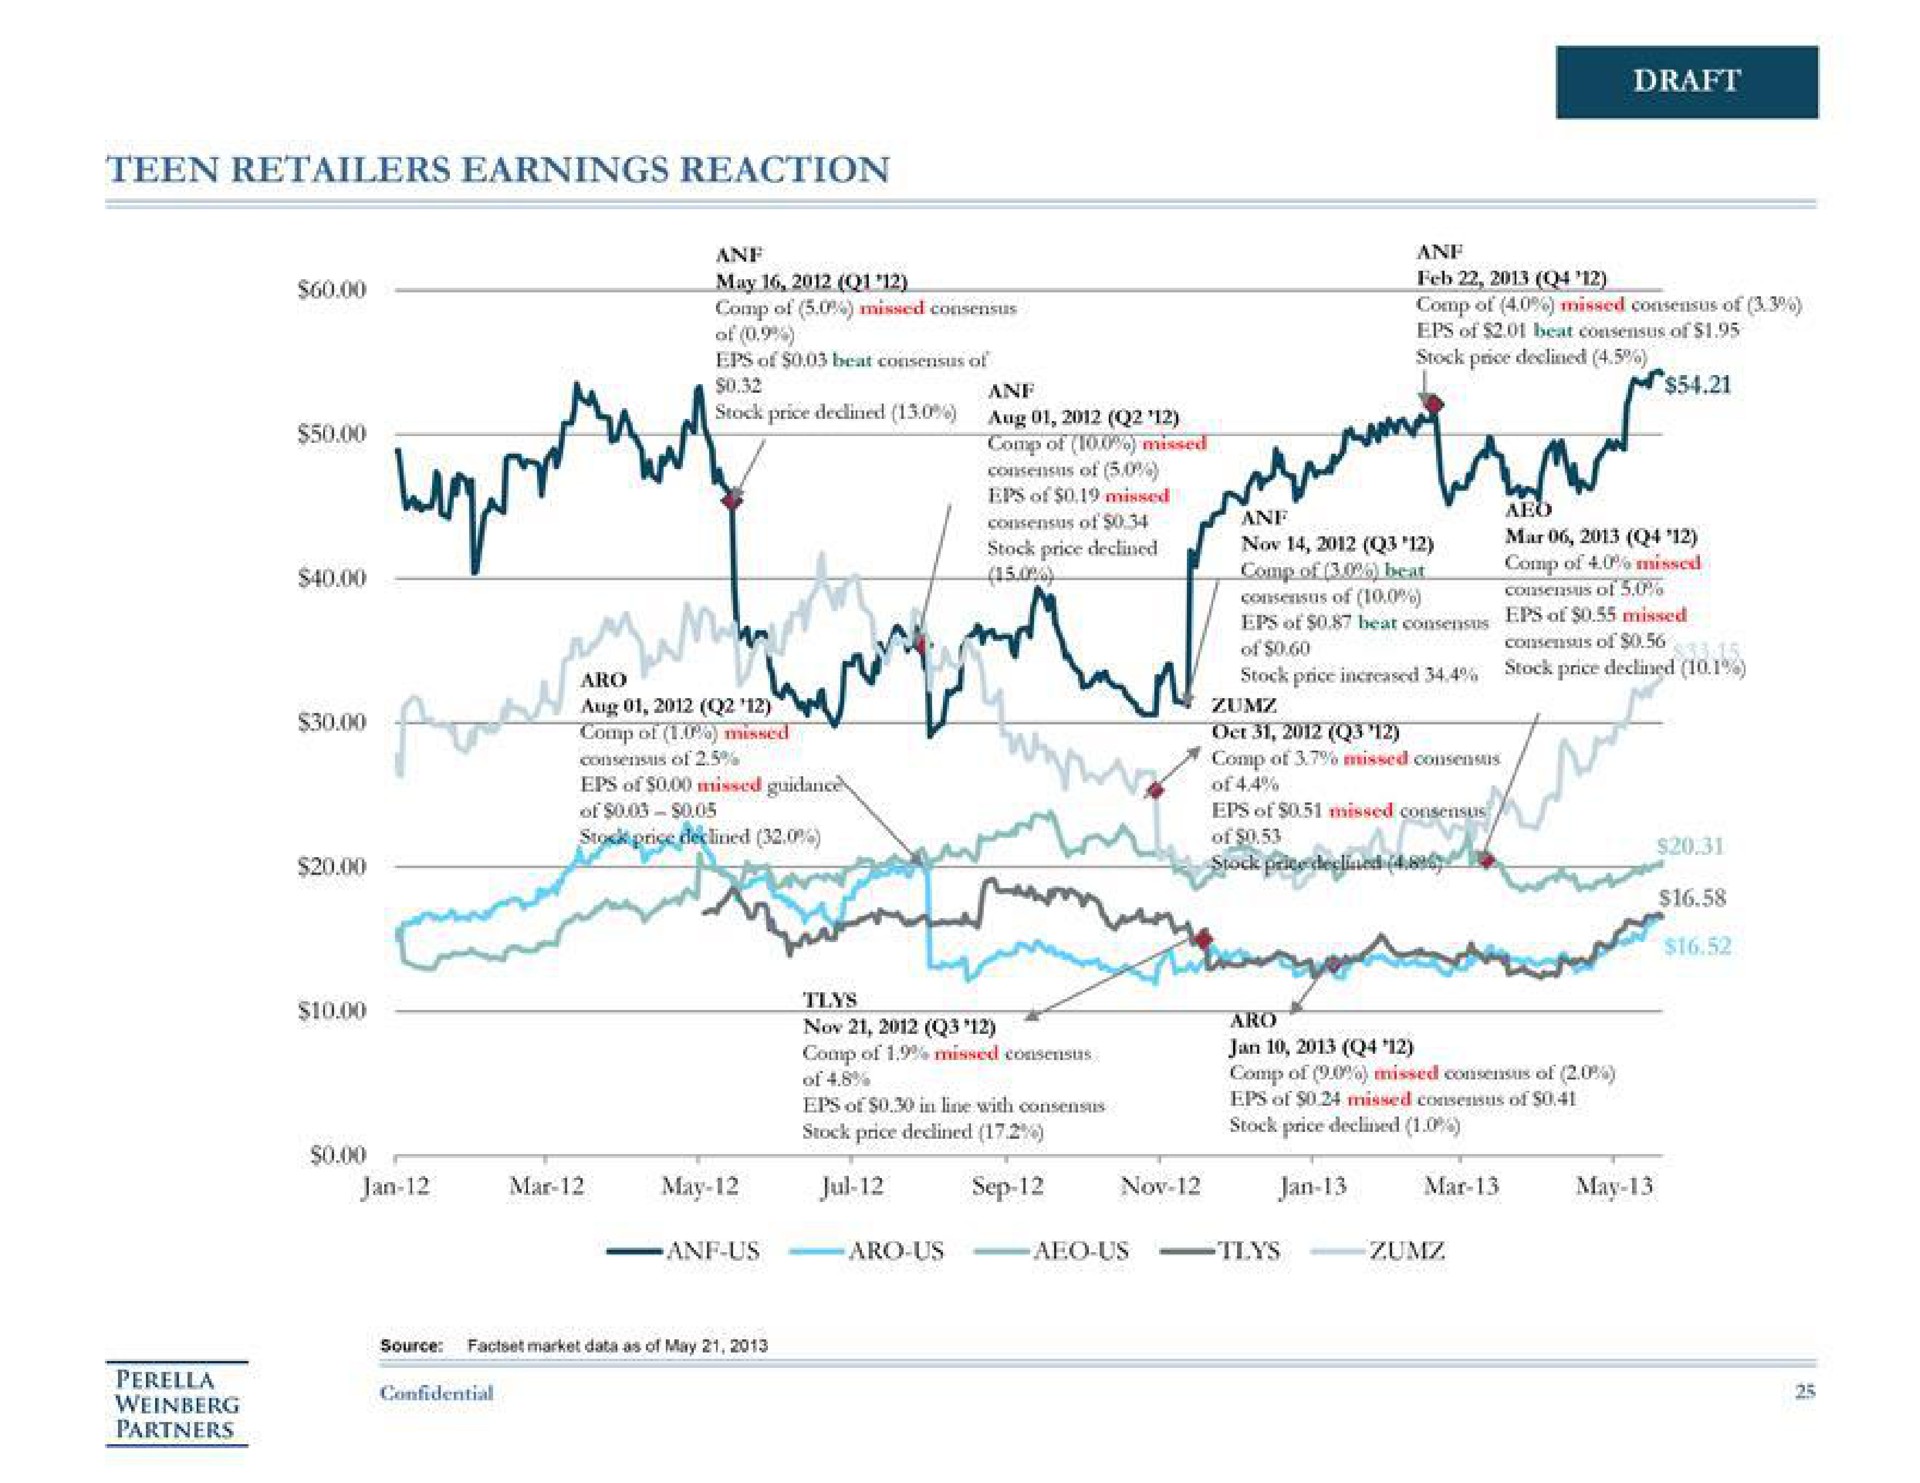 teen retailers earnings reaction may nig stock price bot now mar source market data of may | Perella Weinberg Partners